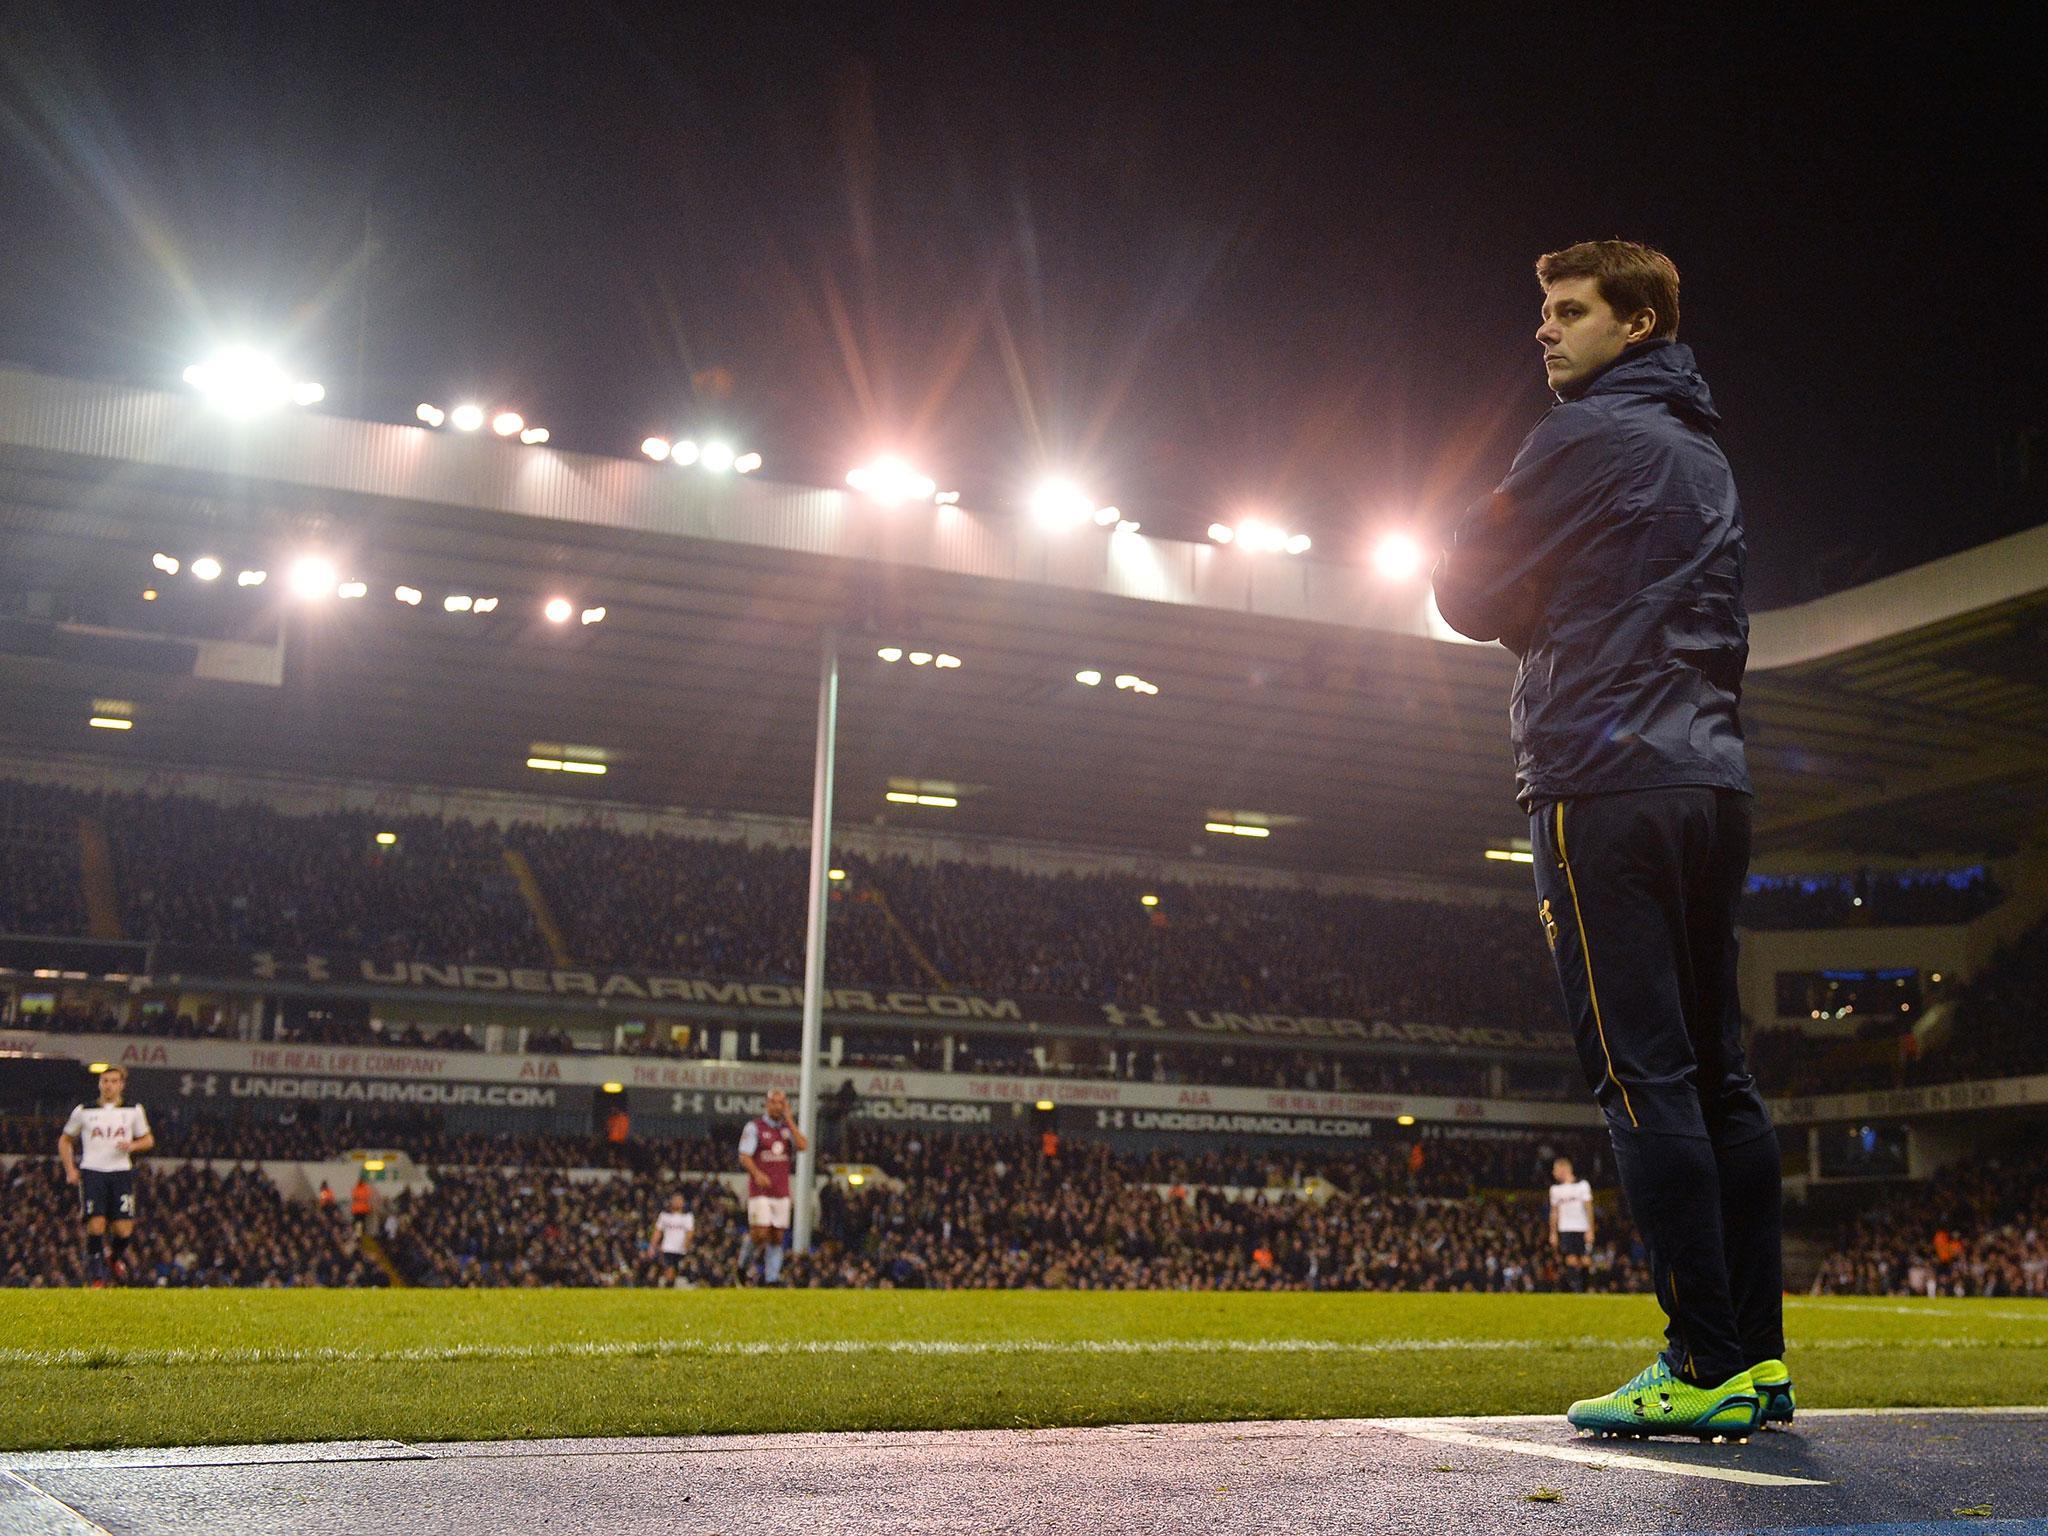 Tottenham will play their final game at White Hart Lane on Sunday